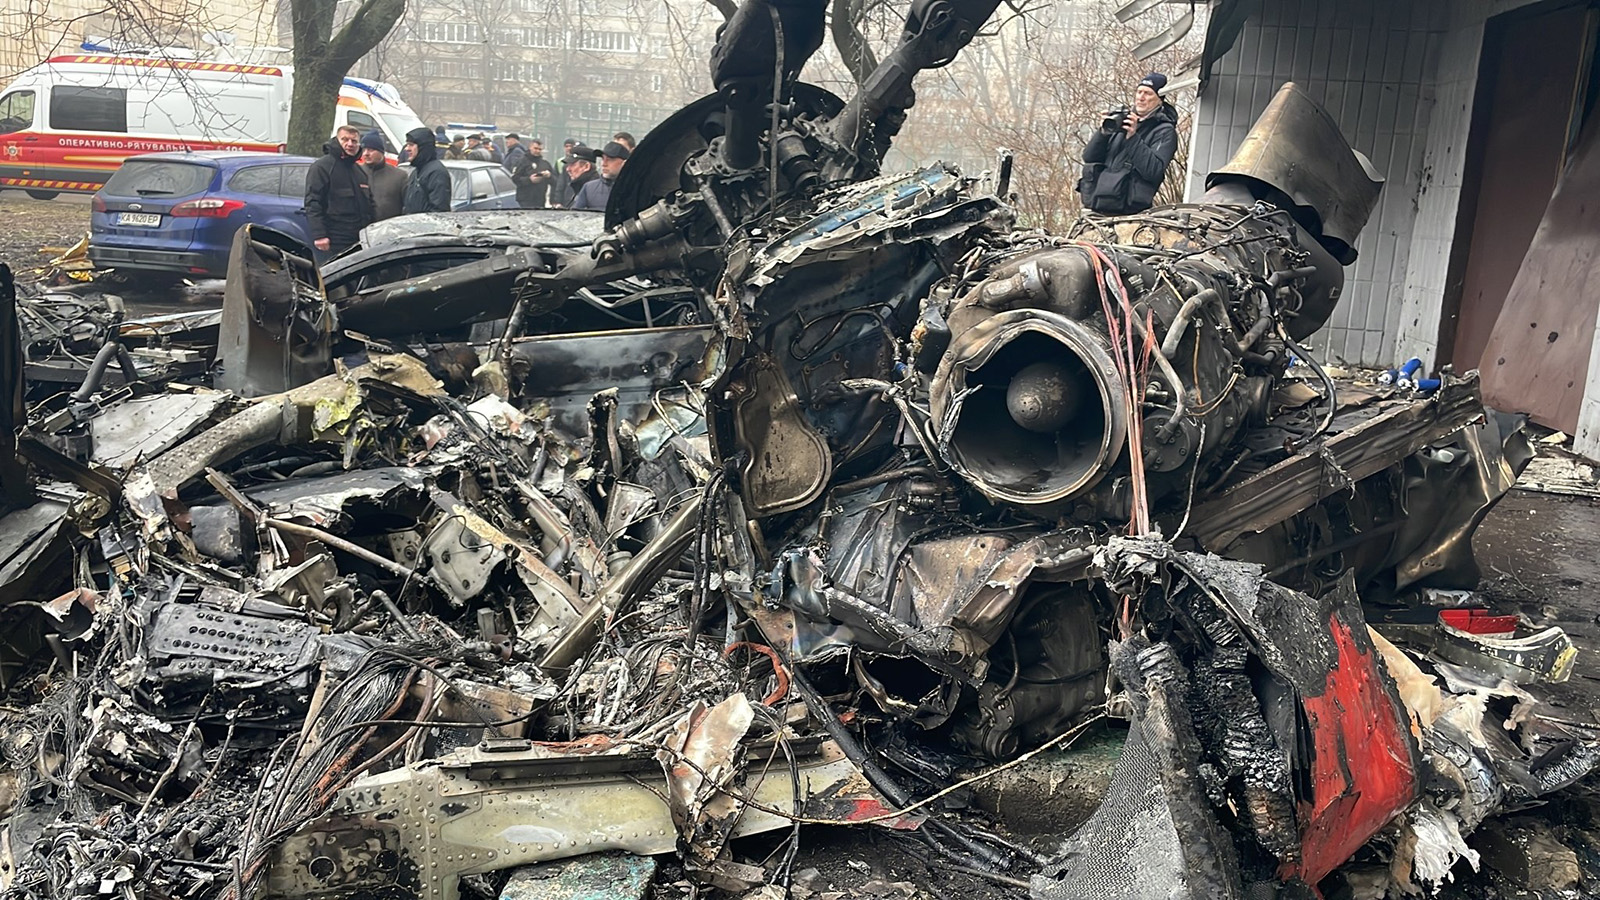 Debris from the helicopter crash in Brovary, Ukraine, on January 18.